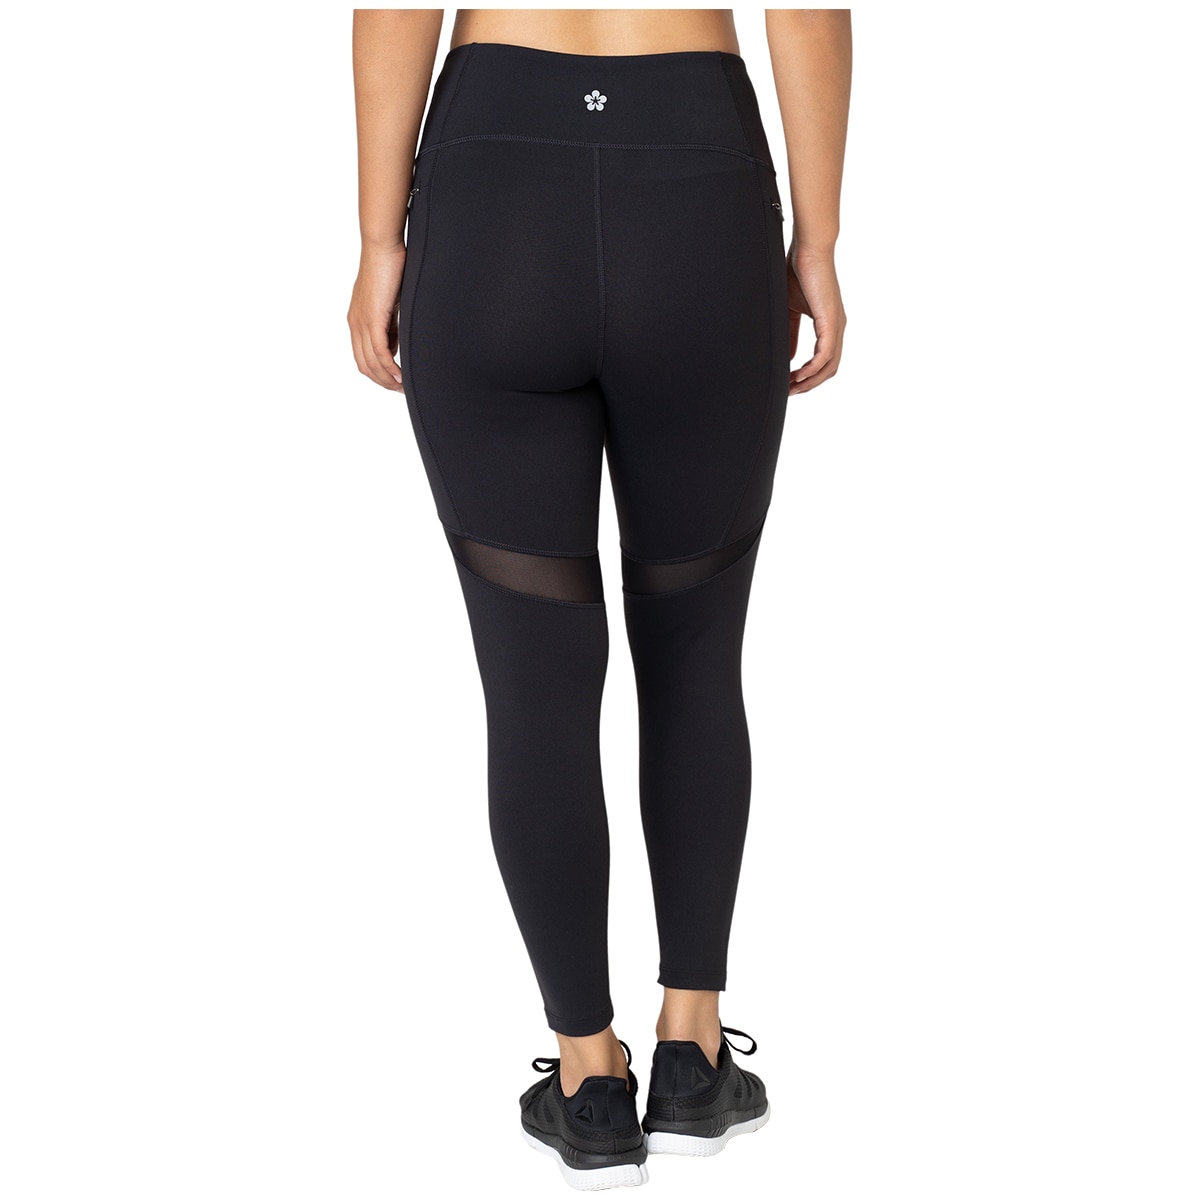 Tuff Athletics Women's High Waisted Legging with Pockets